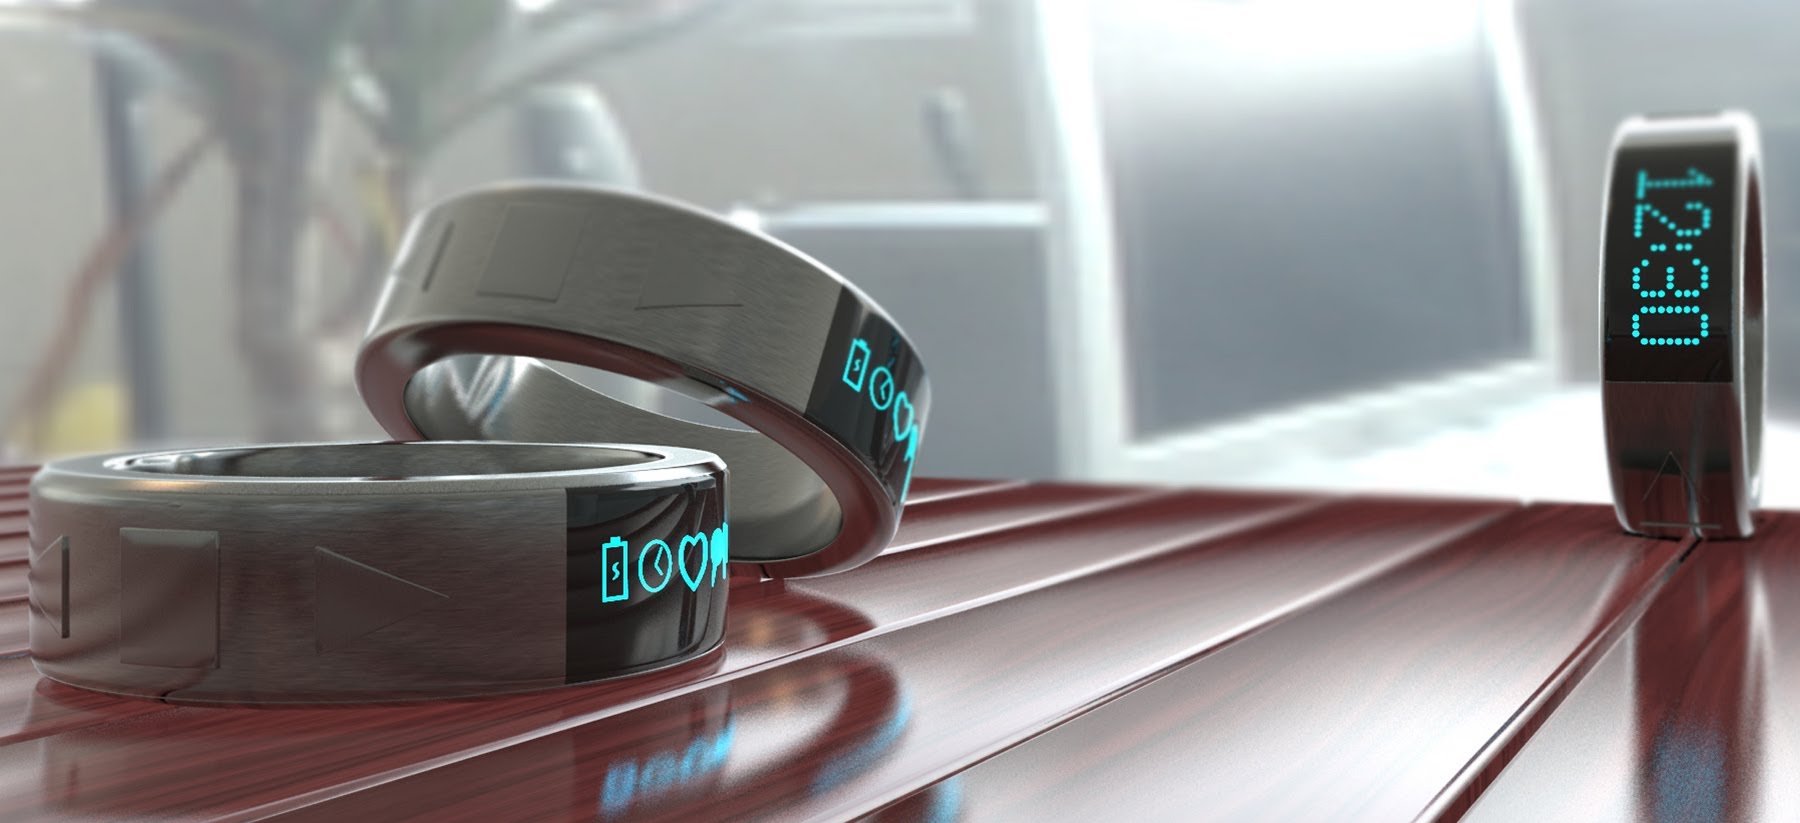 Smart Rings Are the Future of Fashion (Or Not)